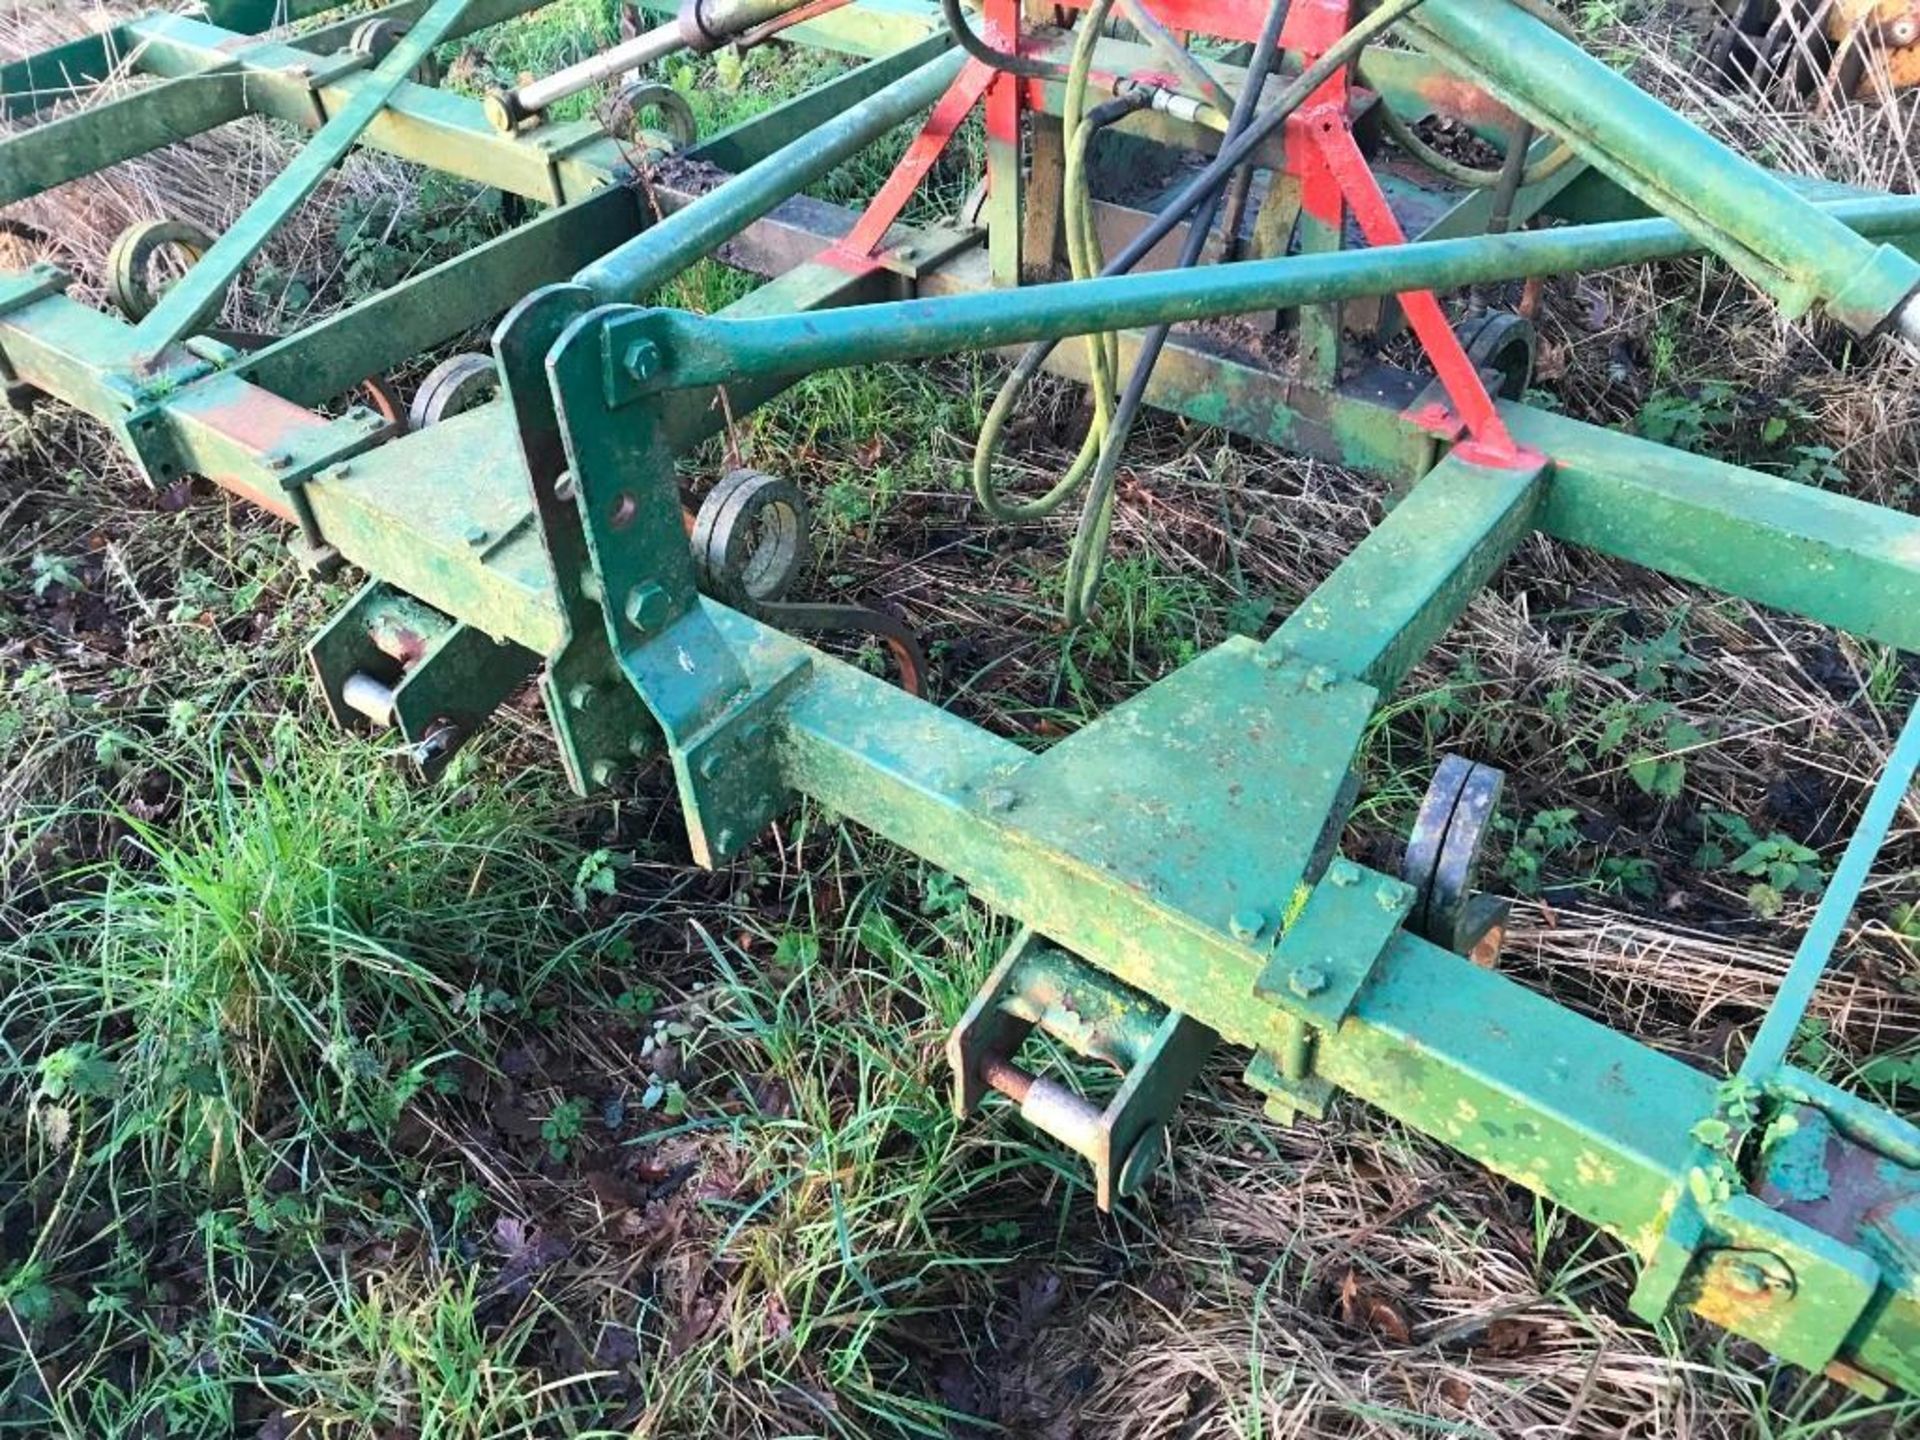 Heavy Duty 4.8m Spring Tine Cultivator - Image 7 of 9